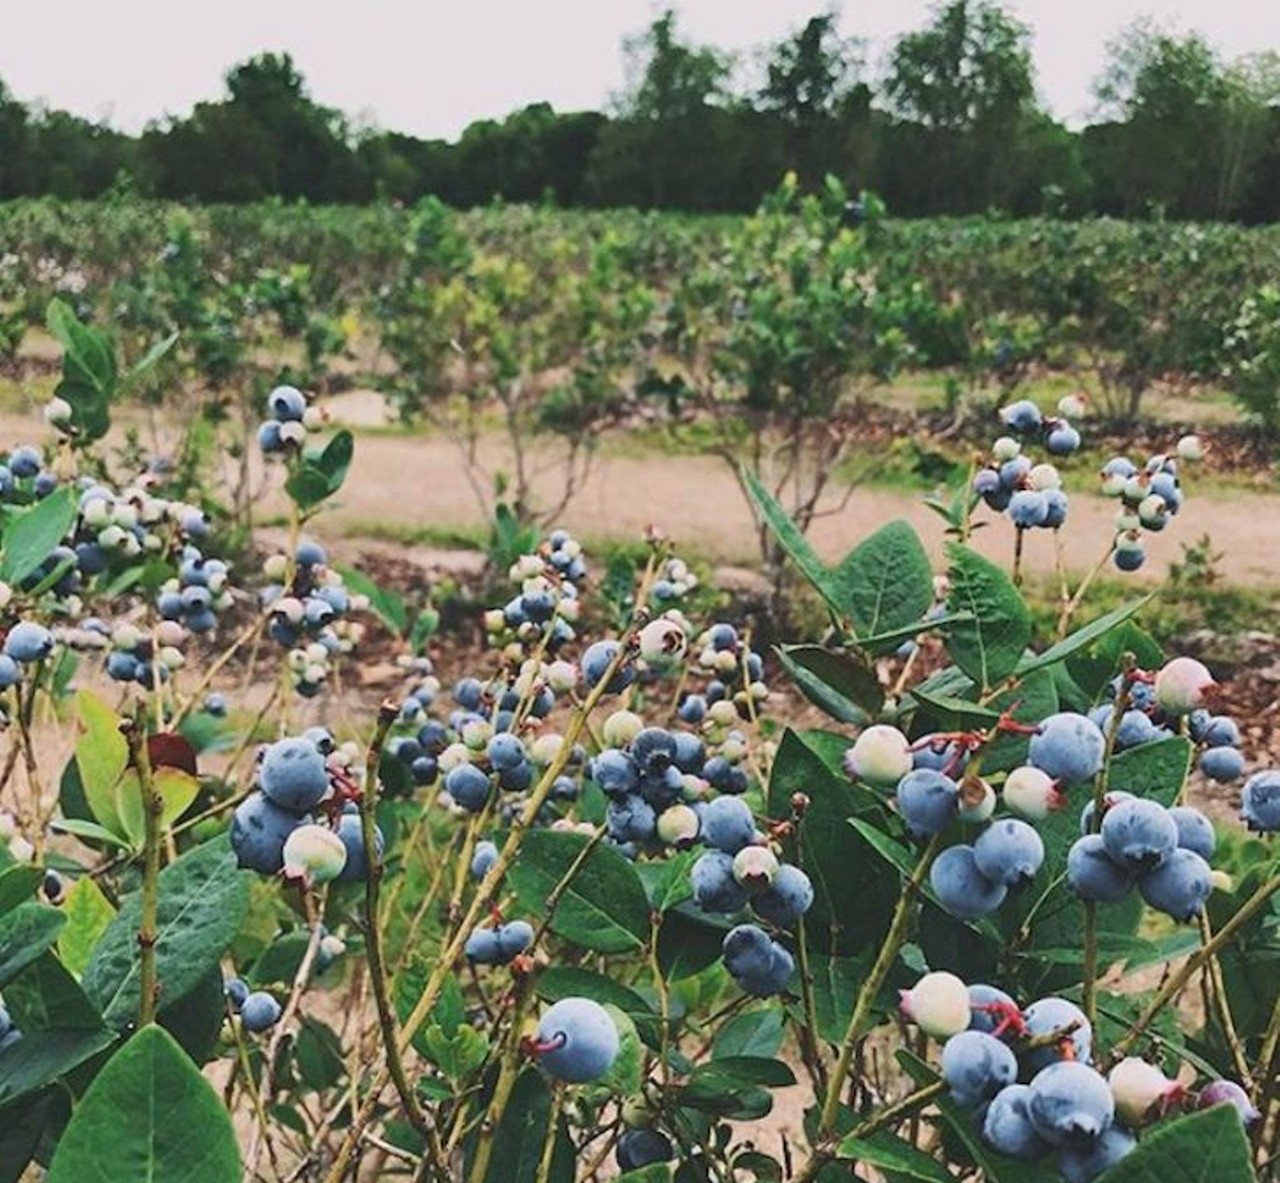 C&W Farms of Central Florida
5710 Hendricks Rd., Lakeland, 863-412-8104
With 5 varieties of blueberries, where could you go wrong? This blueberry farm will be open starting April 10, come pick &#145;em from Tuesdays thru Sunday between 8:30 a.m. to 4 p.m. $4.75 per pound of u-pick berries.
Distance from Orlando: 1 hour and 21 minutes
Photo via batmansidentity/Instagram